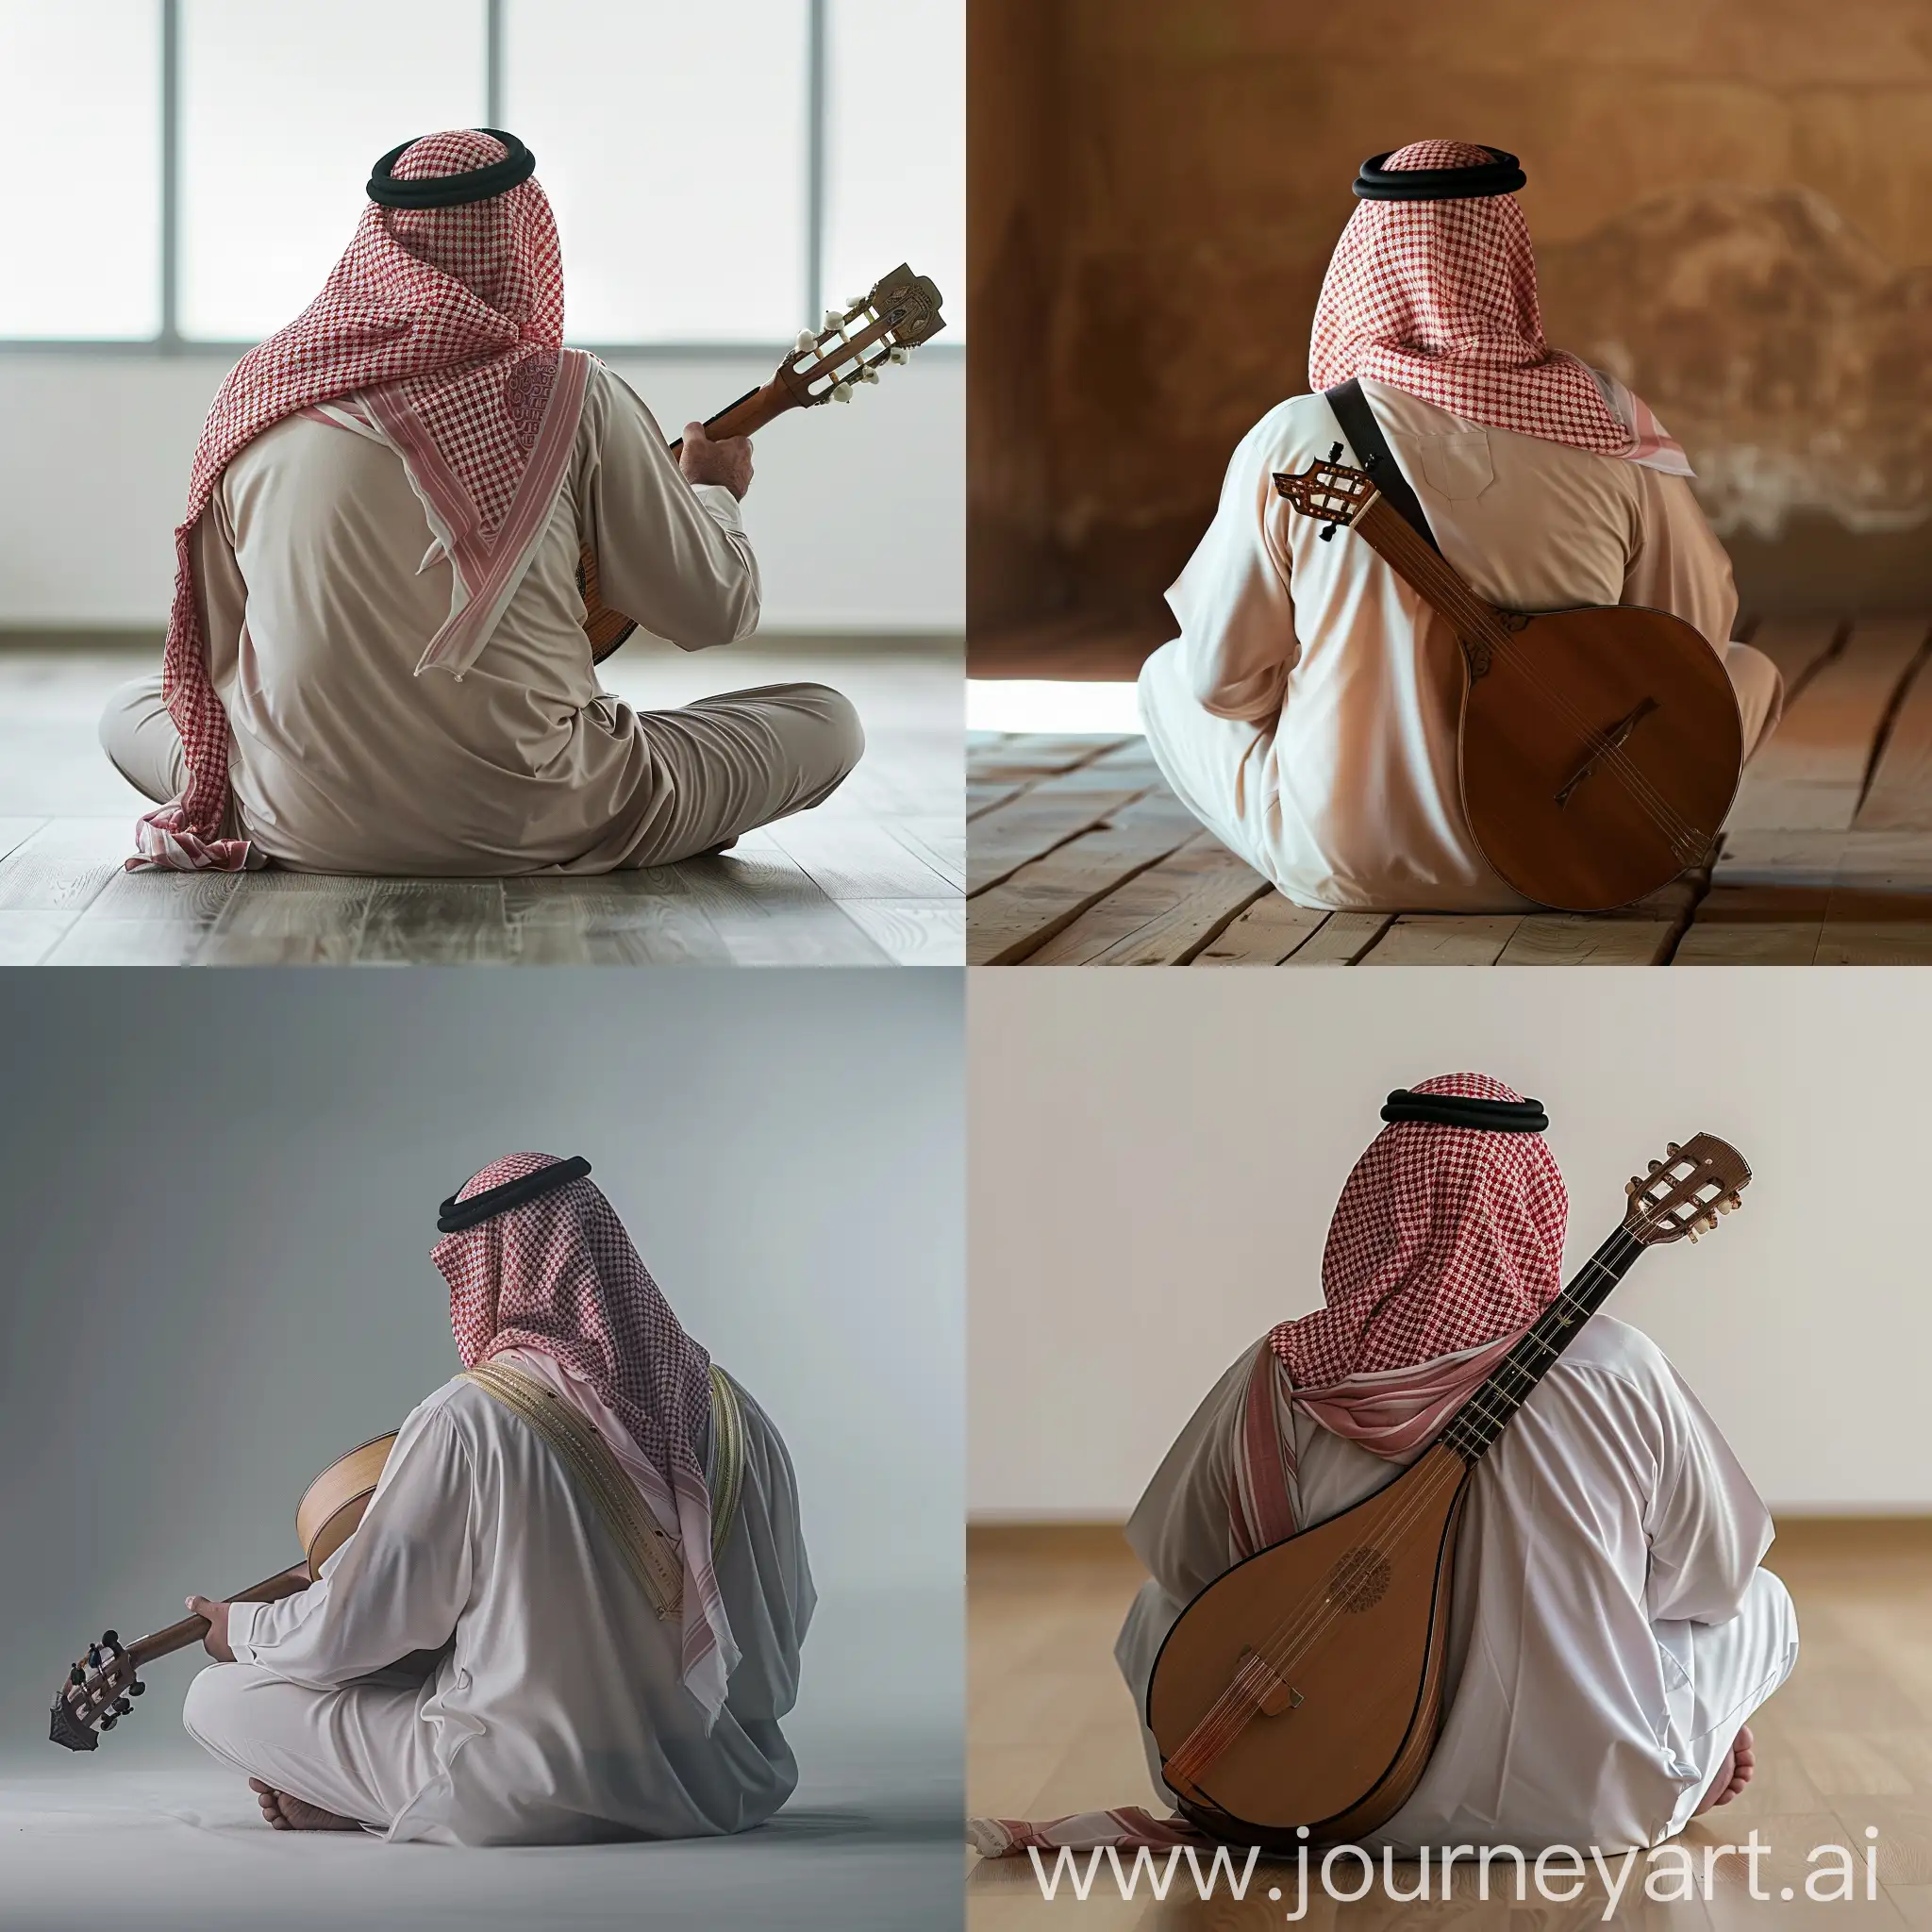 Rear side view of a Saudi man sitting cross-legged on the floor and playing the oud